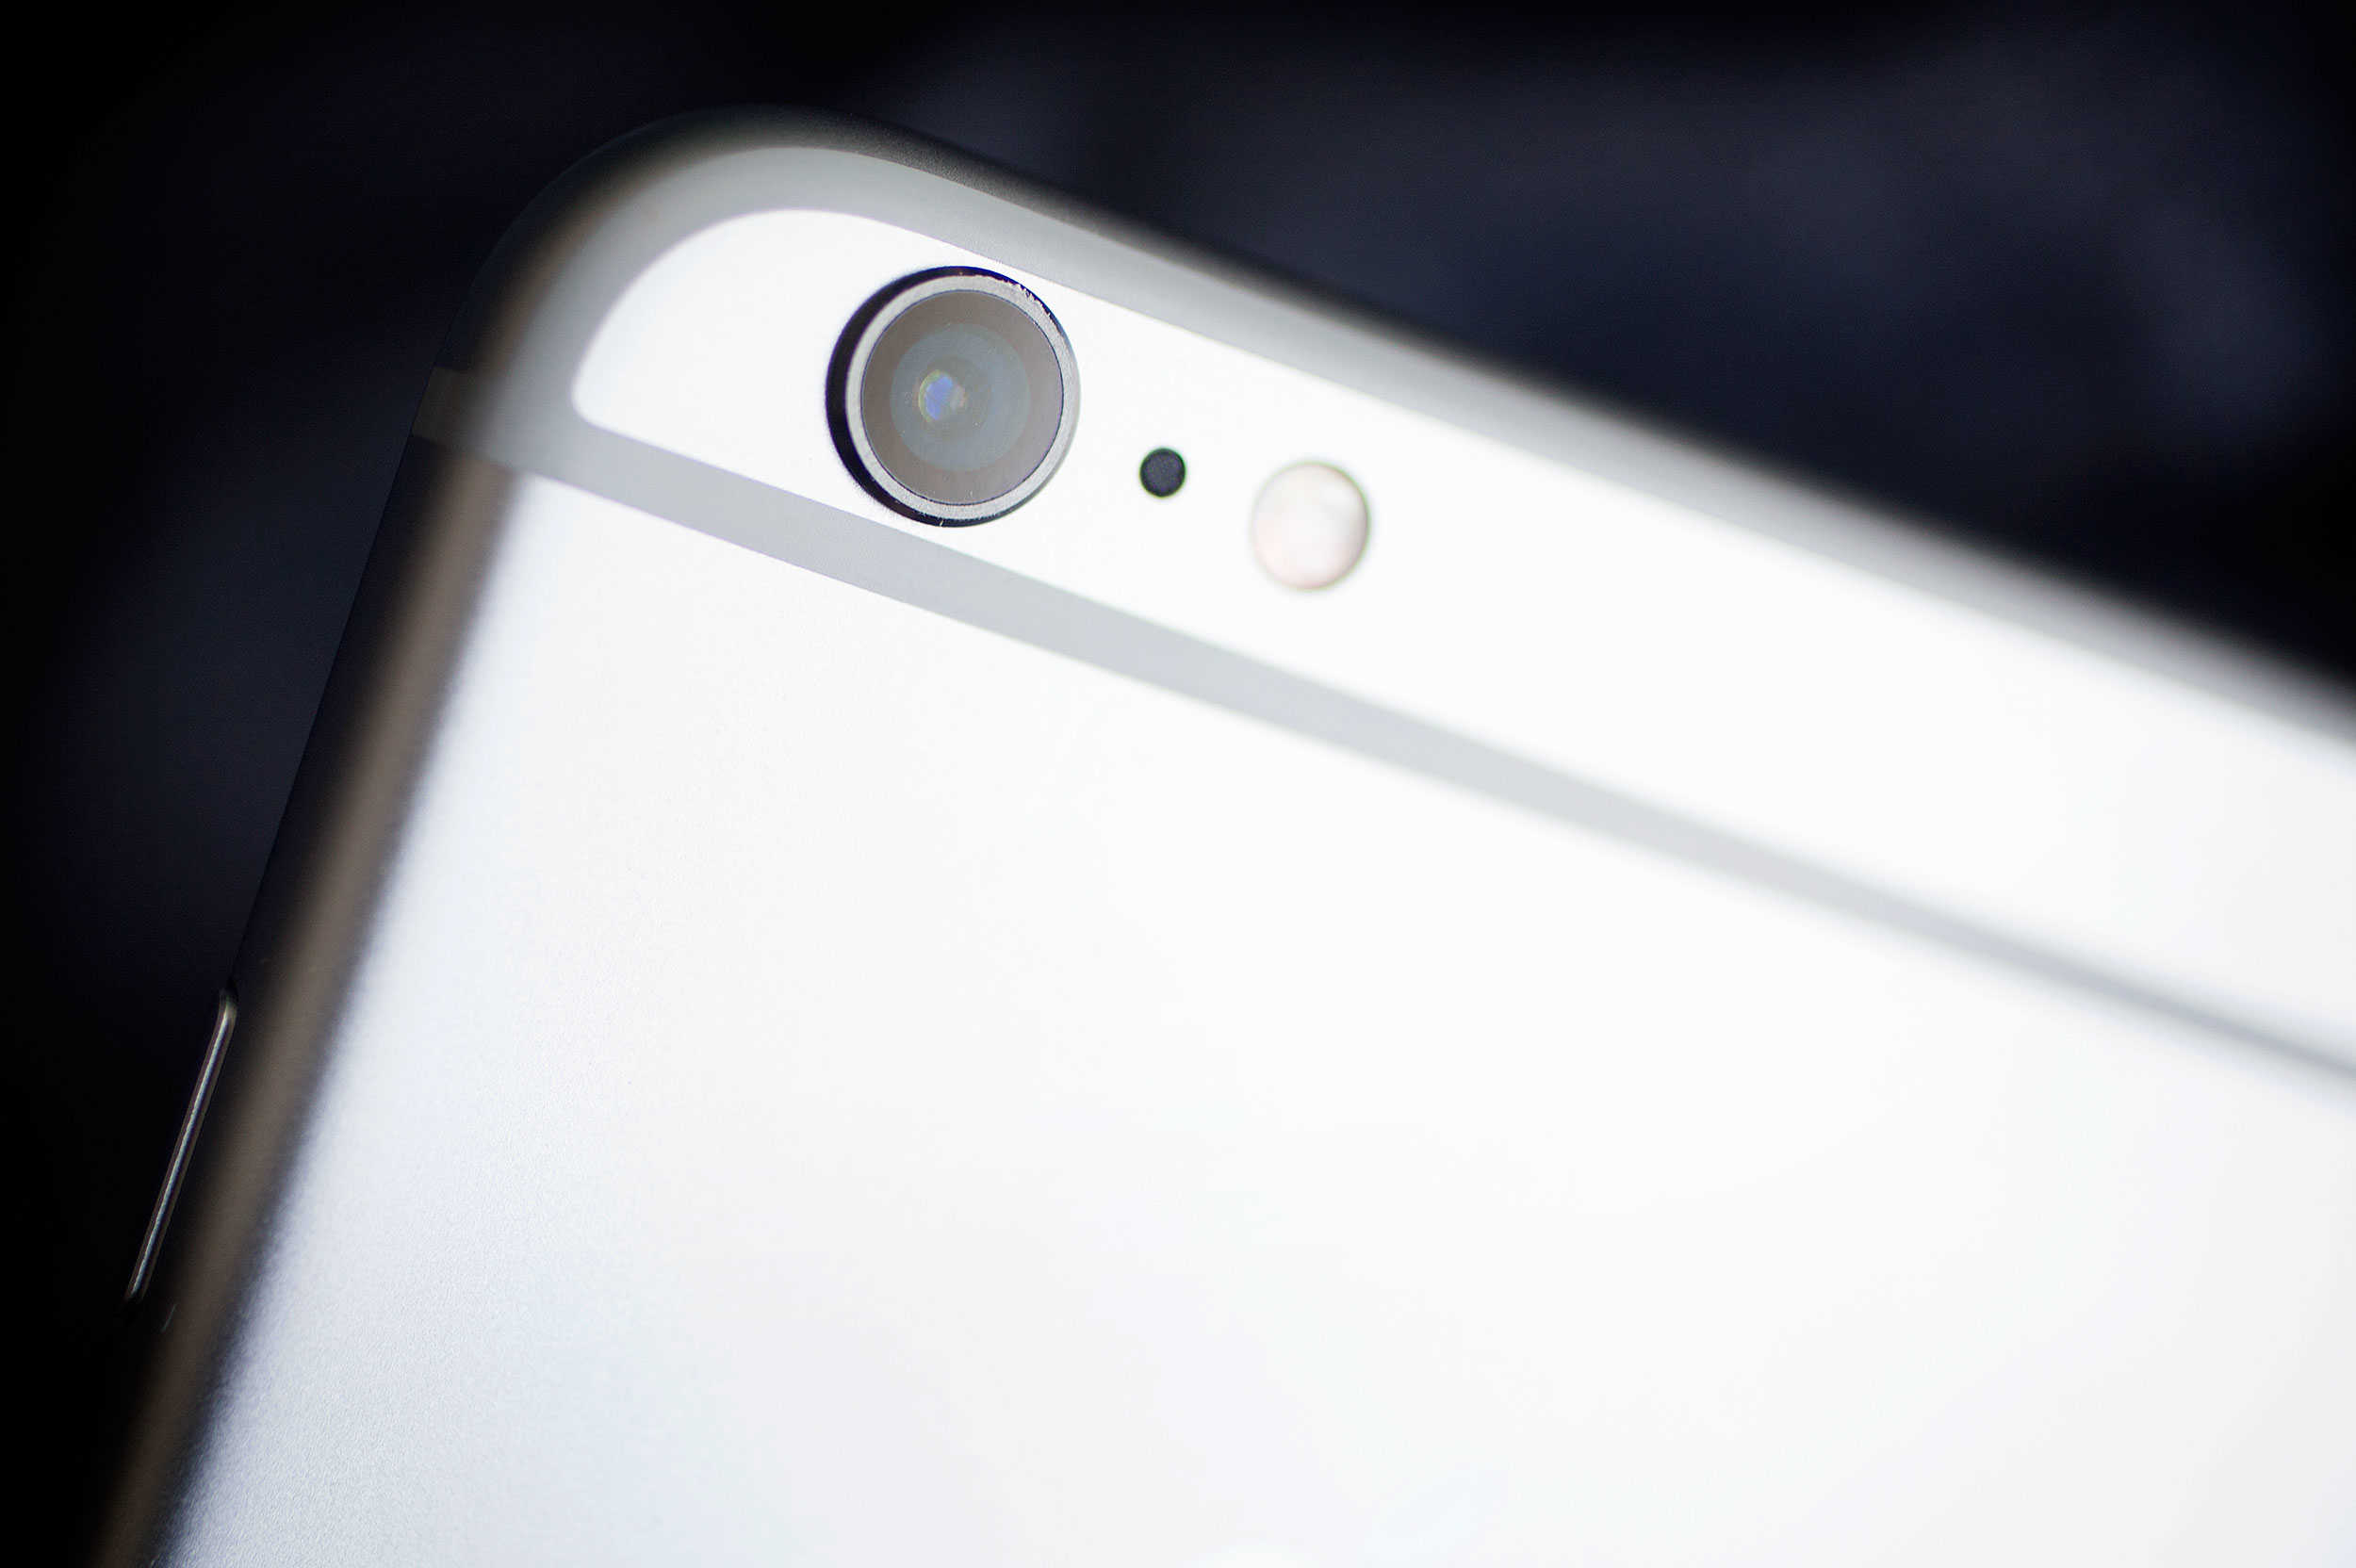 The cameras on the iPhone 6s has a 12-megapixel sensor and 4K video.